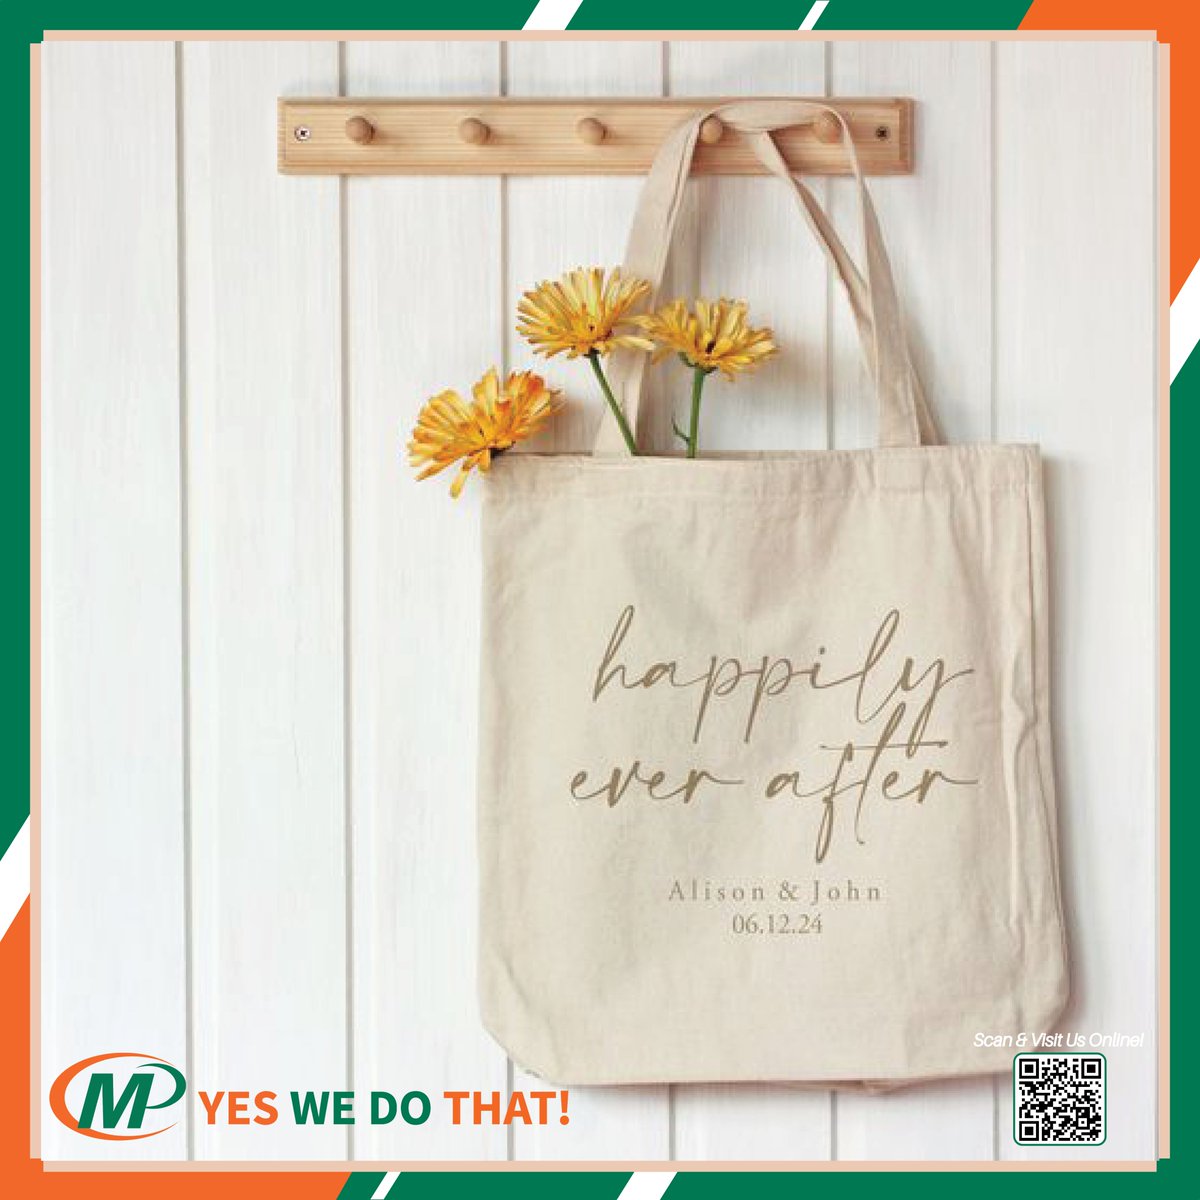 Keep the customization going with these awesome gift totes for your bridal party! 🎁

promo.beavercreekminutemanpress.com/bags-tote.htm

#bridalparty #customizedgifts #personalizedtotes #totesfordays #weddingprep #bridesquadgoals #weddingdetails #bridetobe2023 #bridesquad #bridetribe